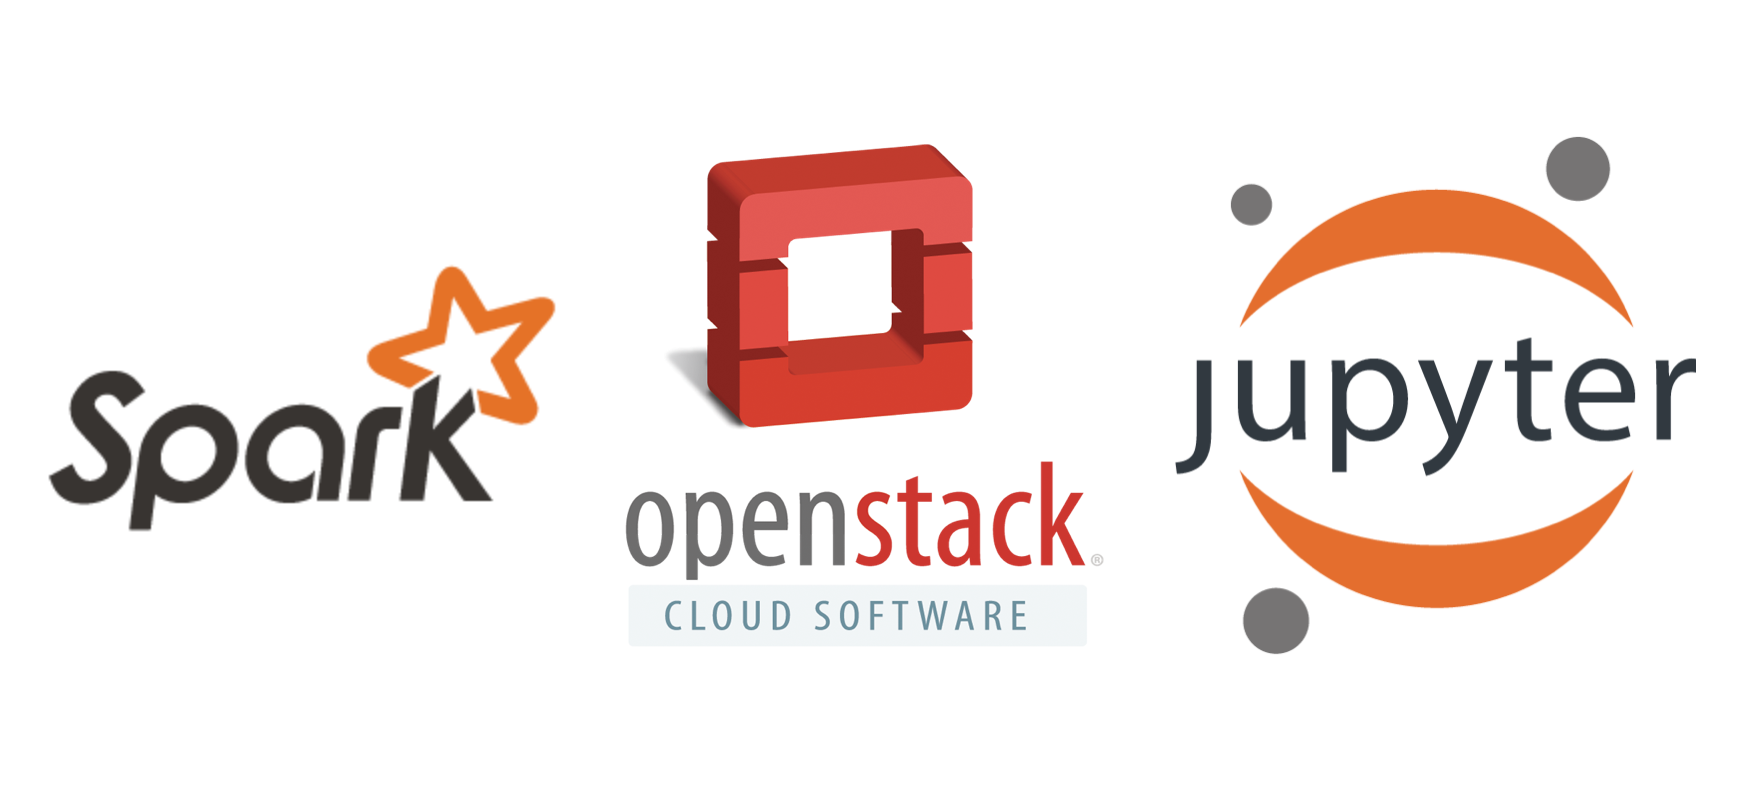 Spark on OpenStack with Jupyter